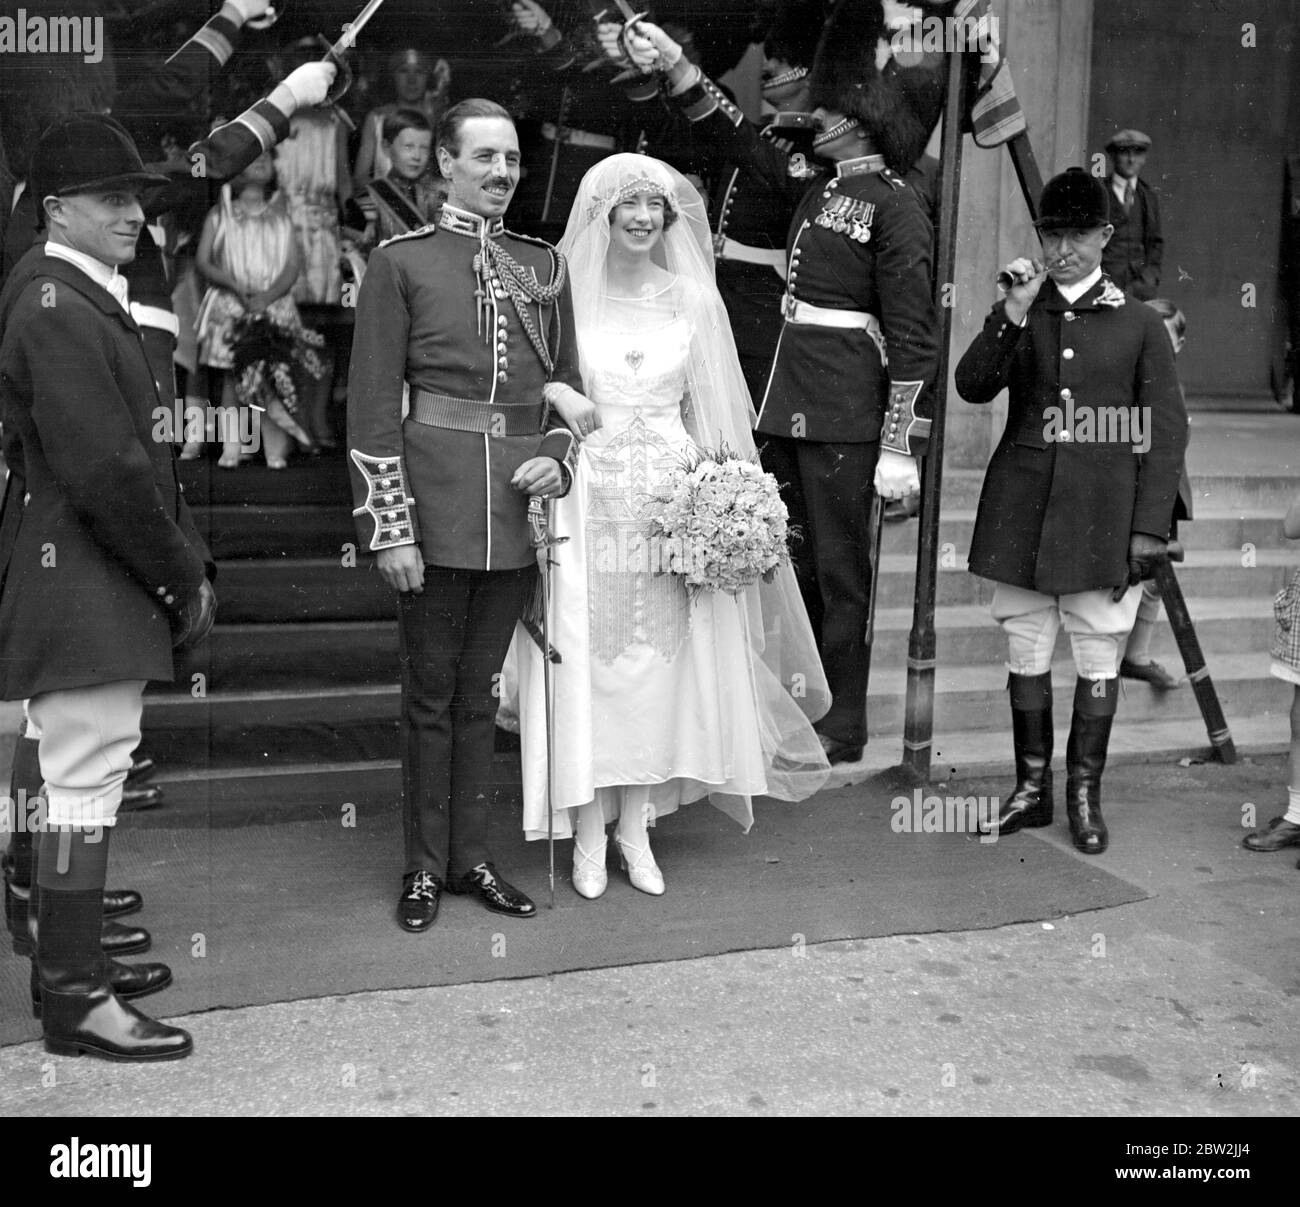 Wedding of Sir Alexander Stanier, Welsh Guards and Miss Dorothy Miller (daughter of Gen and Mrs Miller, Shotover Park) at the Guards Chapel, Wellington Barracks, London. J. Wardle (Huntsman of S. Oxforshire Hunt, Right Adams) 21 July 1927 Stock Photo